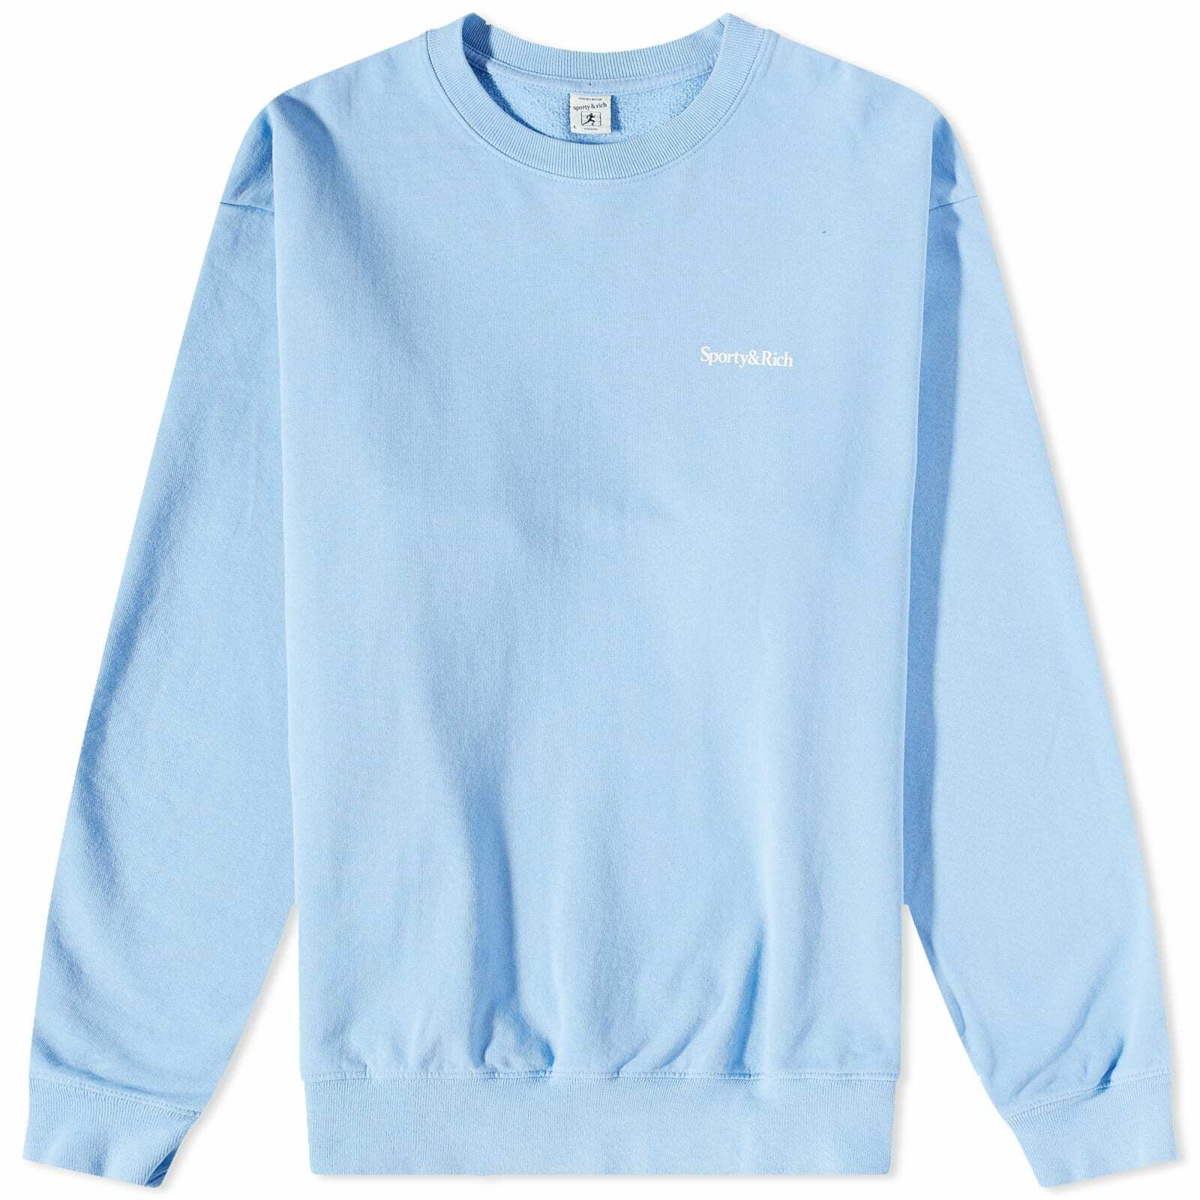 Sporty & Rich Sweatshirts  Made In California Crewneck Periwinkle